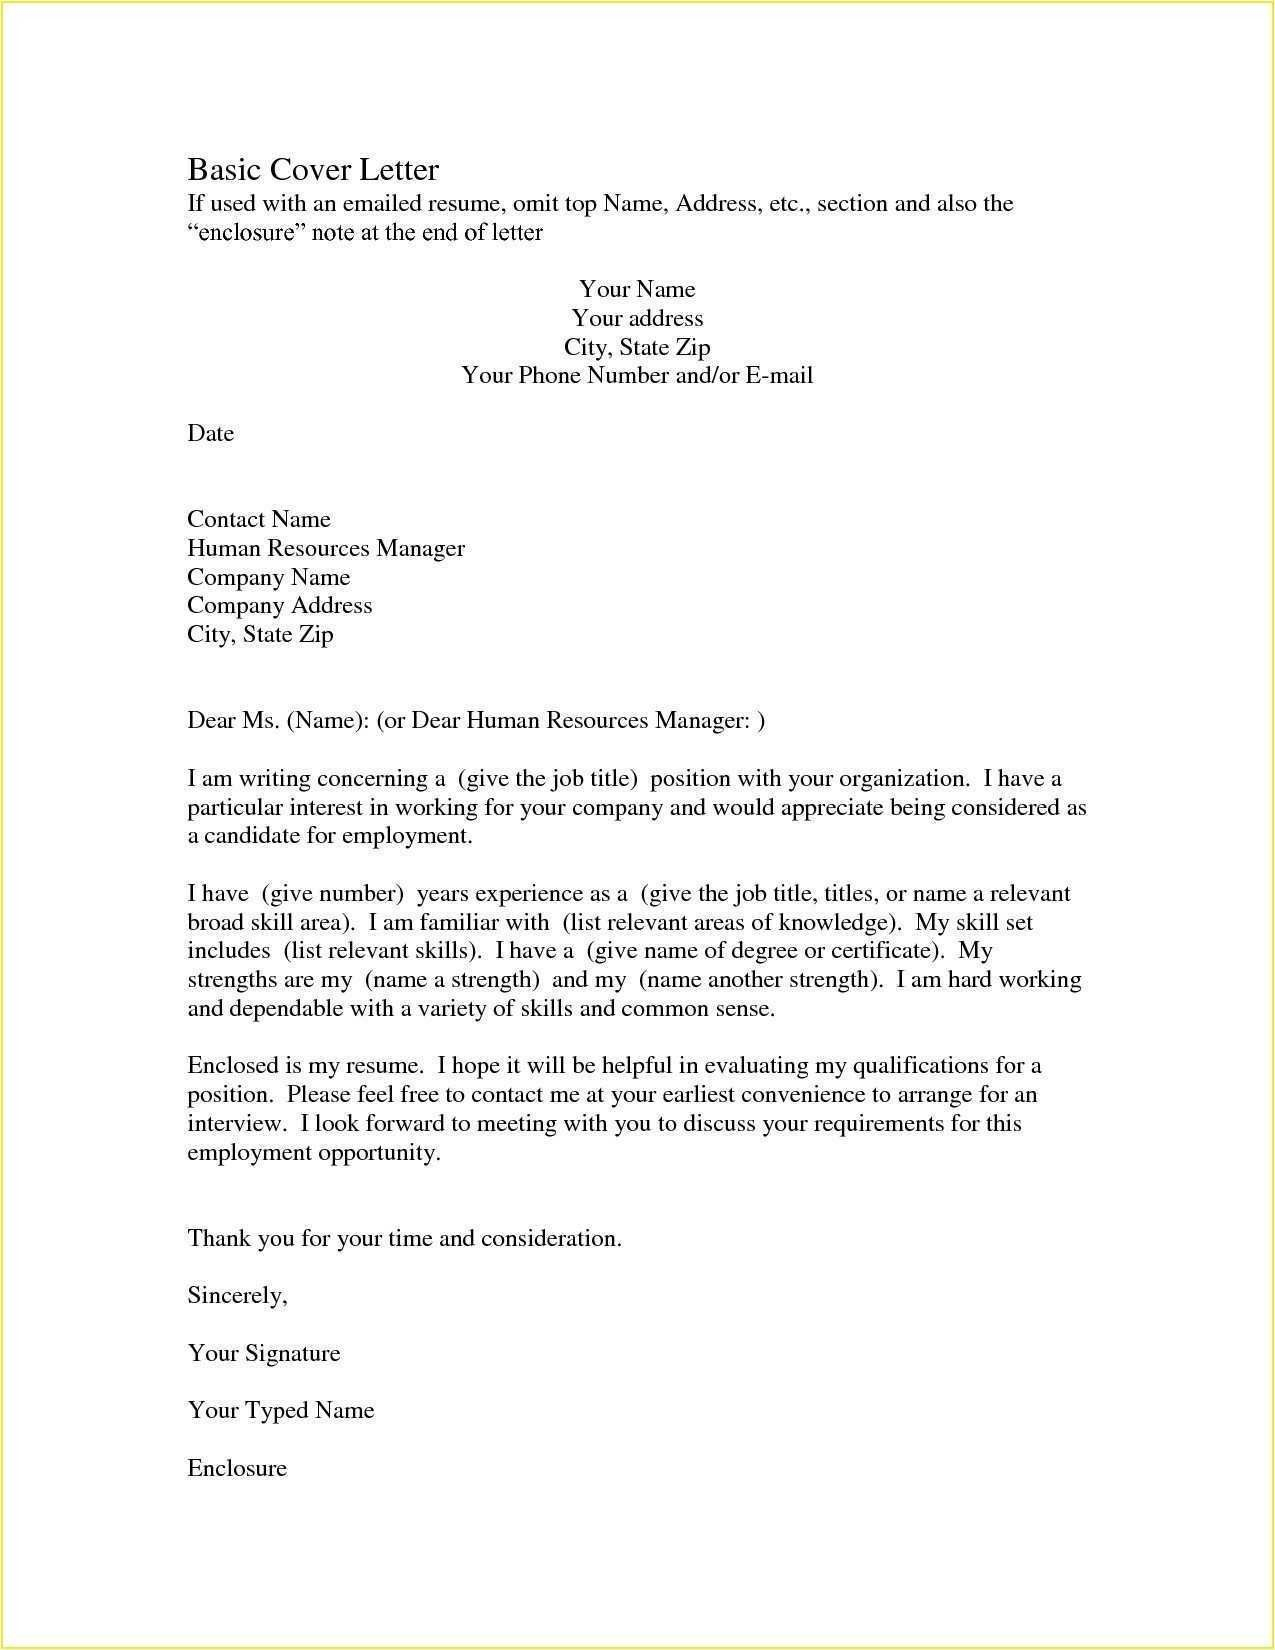 how to end cover letter for job application